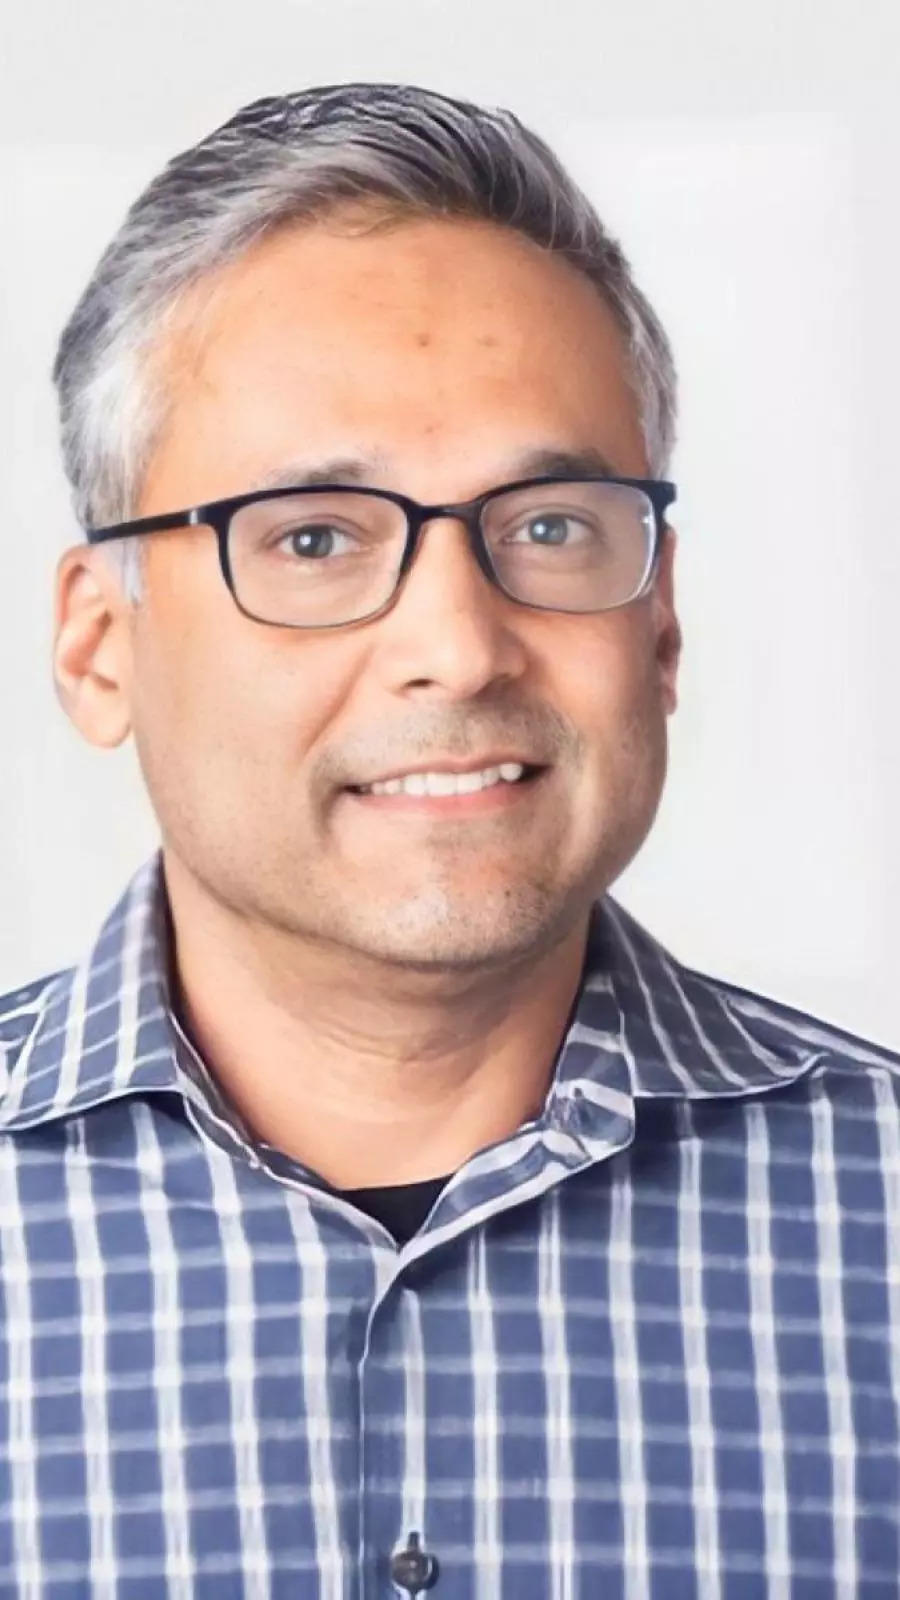 Grammarly CEO Rahul Roy Chowdhury has a personal mission. It's not what you think